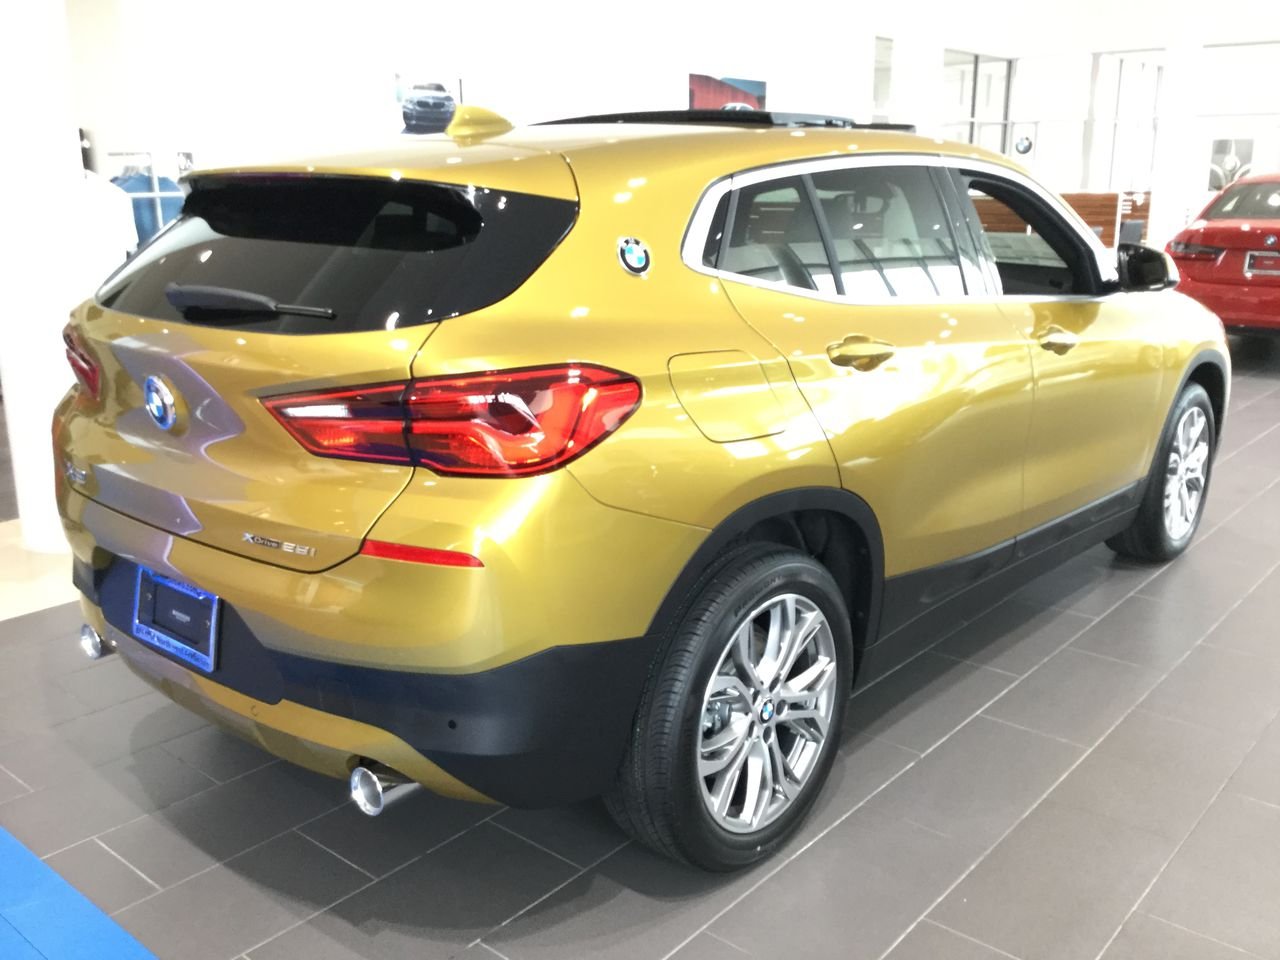 Pre-Owned 2019 BMW X2 xDrive28i Sport Utility in Fayetteville #WN16514